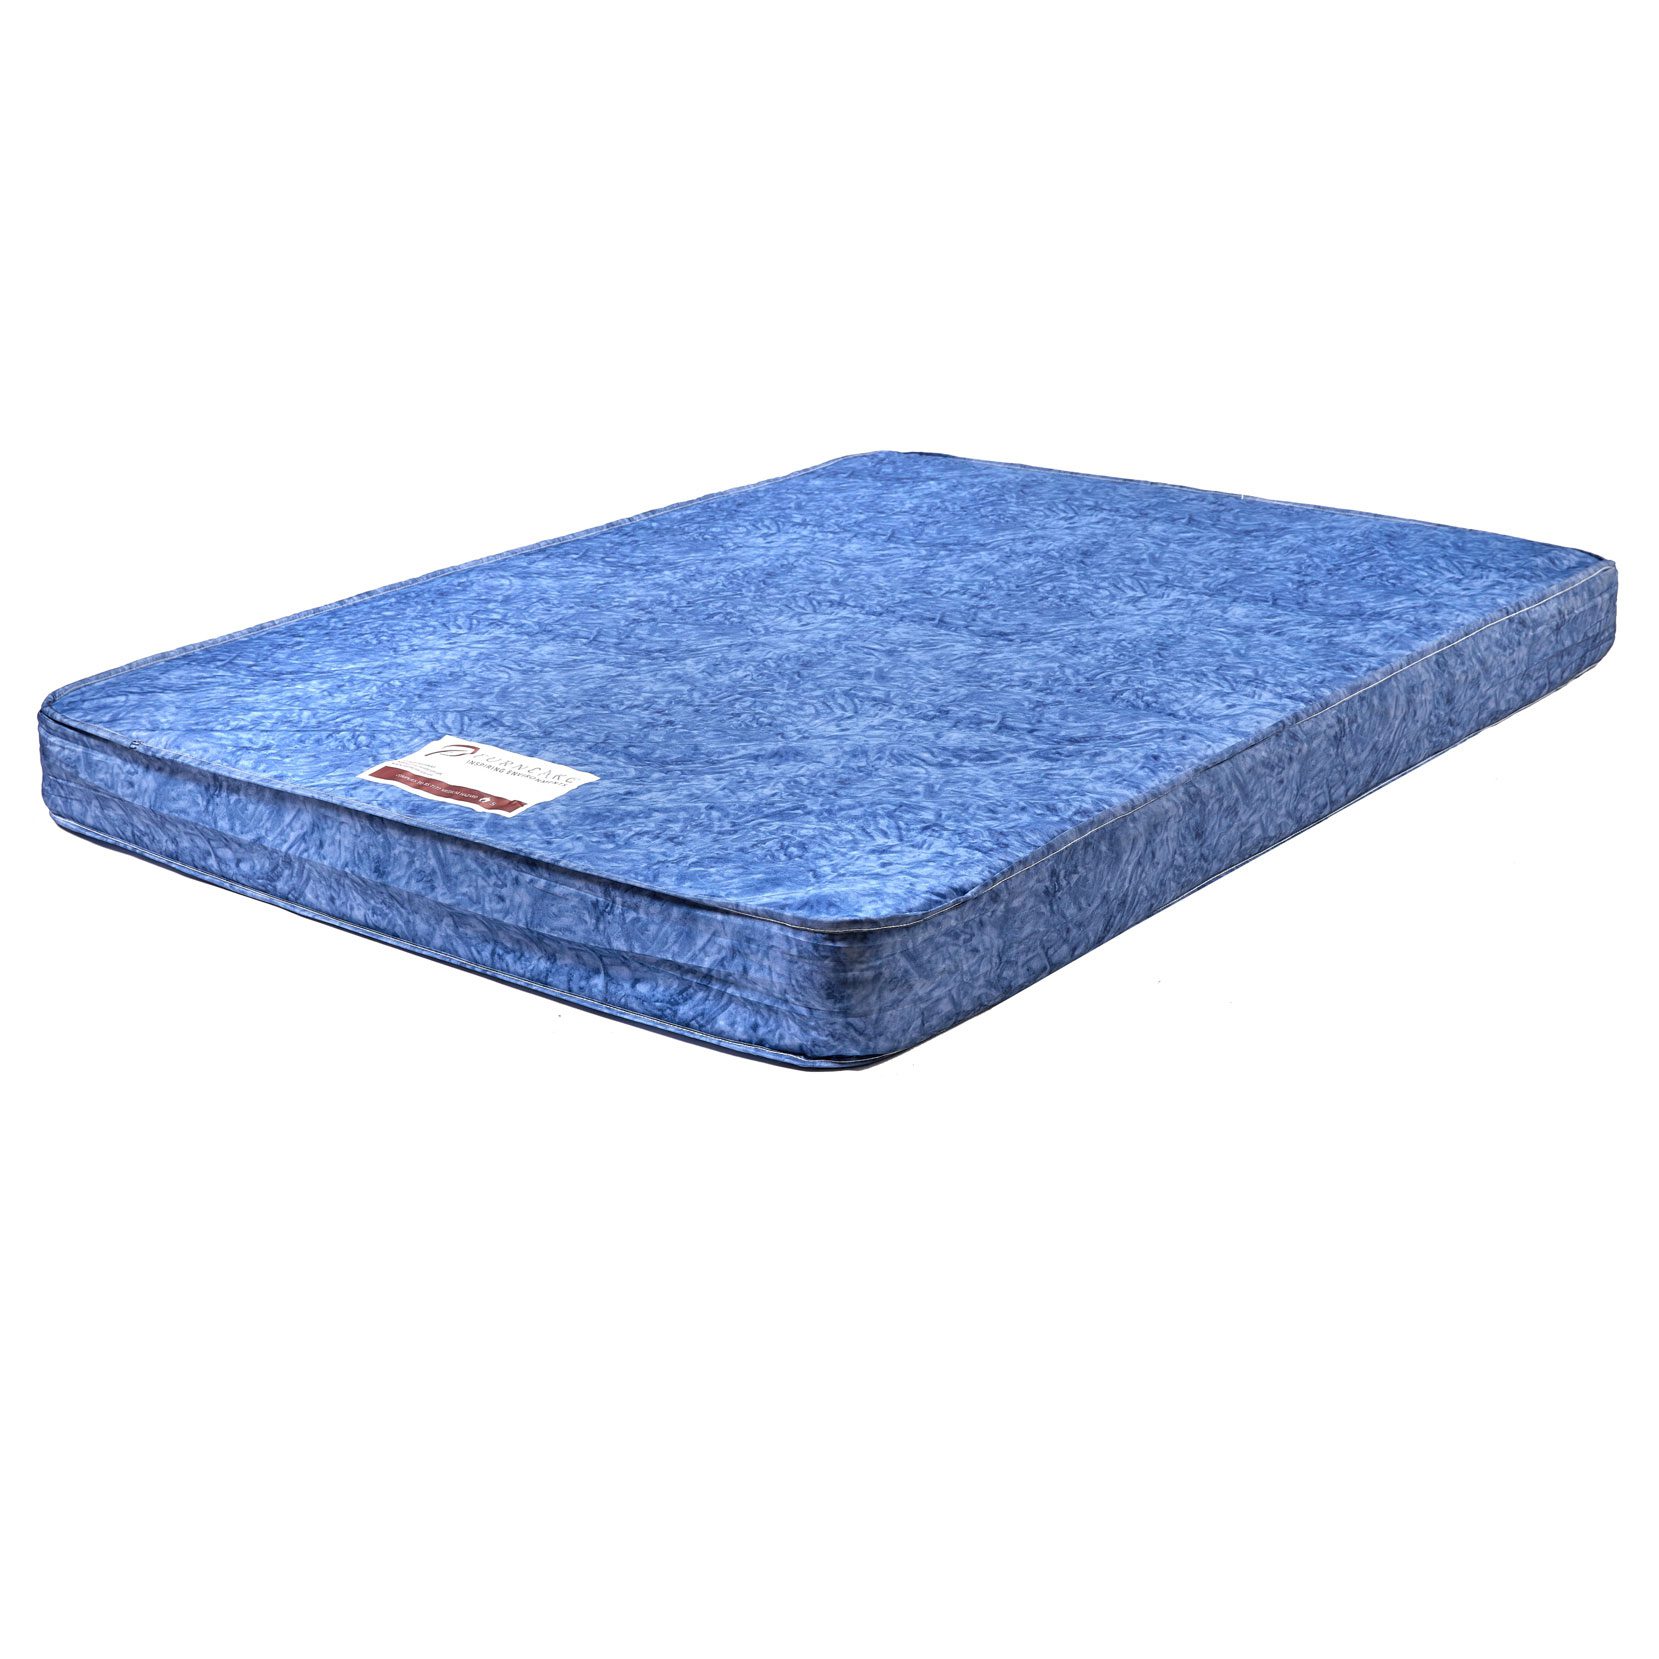 Sprung Mattress With Vapour Permeable Cover